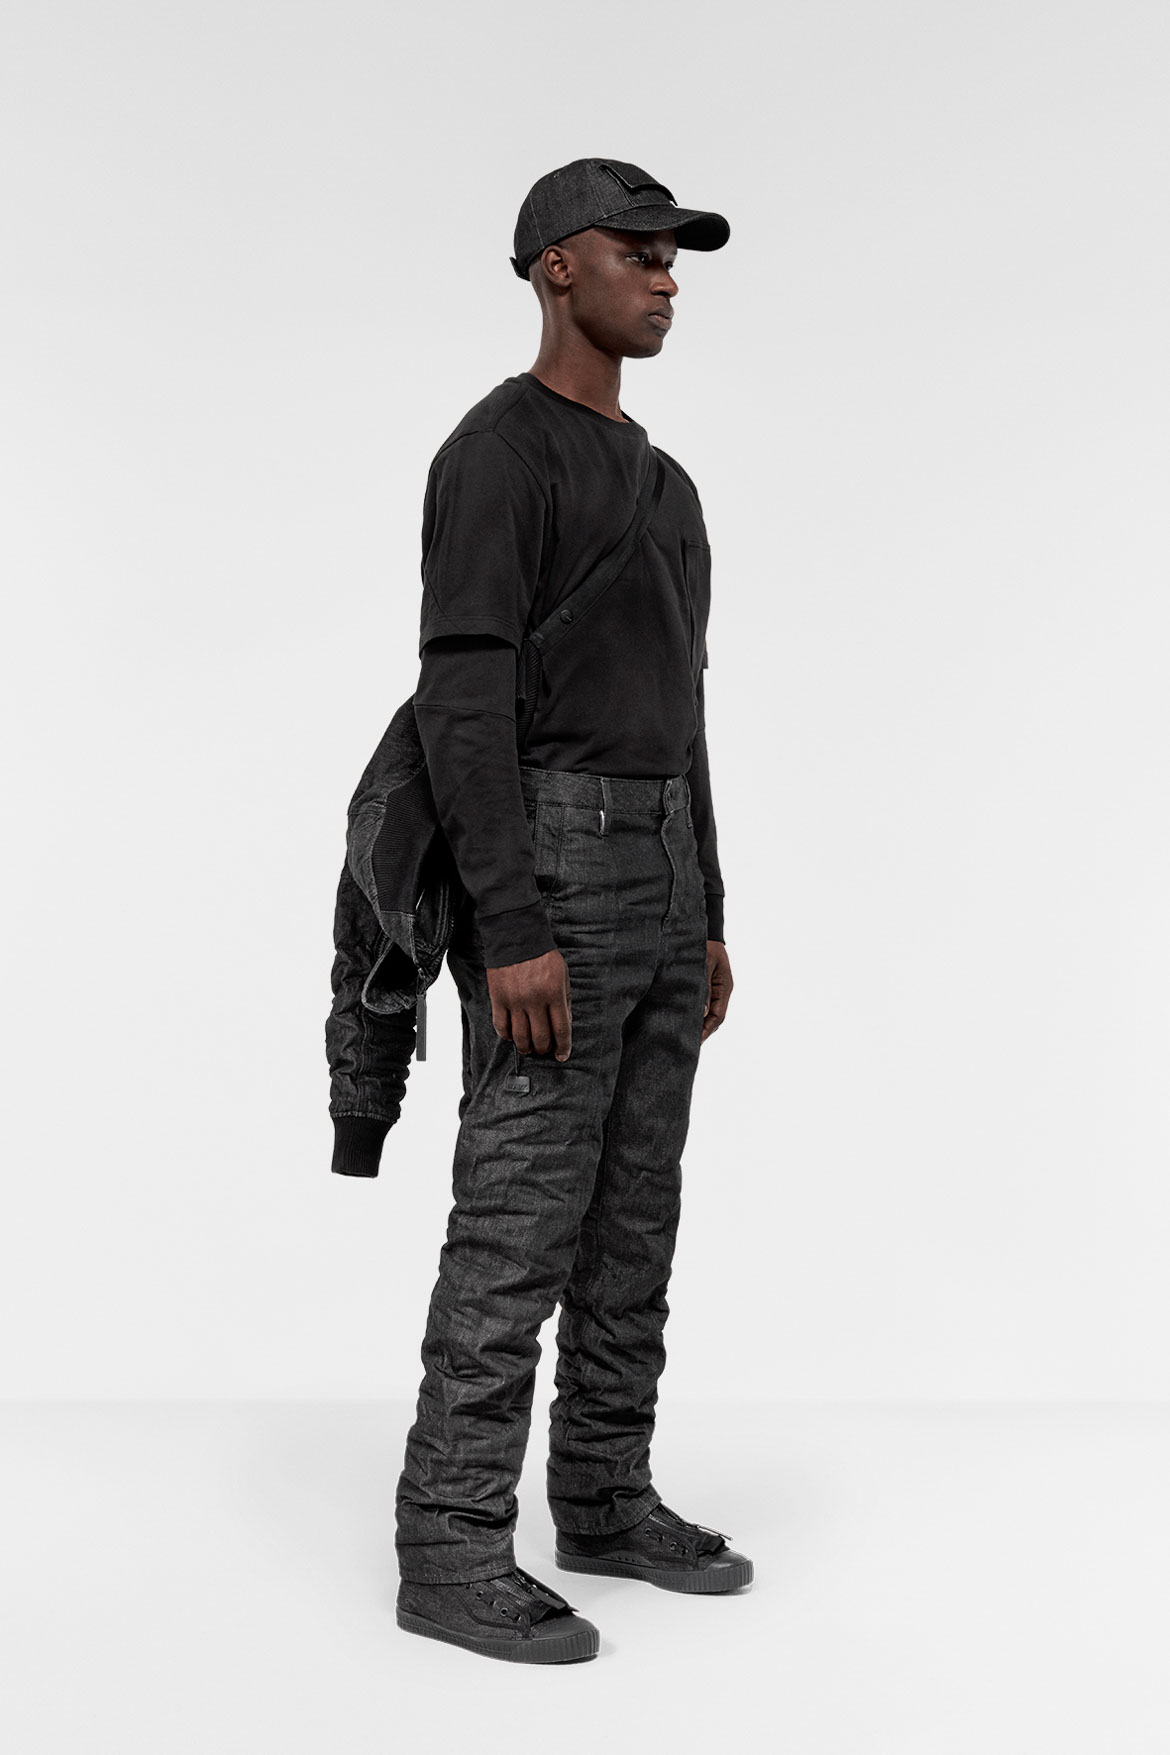 G-STAR RAW RESEARCH II BY AITOR THROUP | LARMOIRE-SINGAPORE.COM